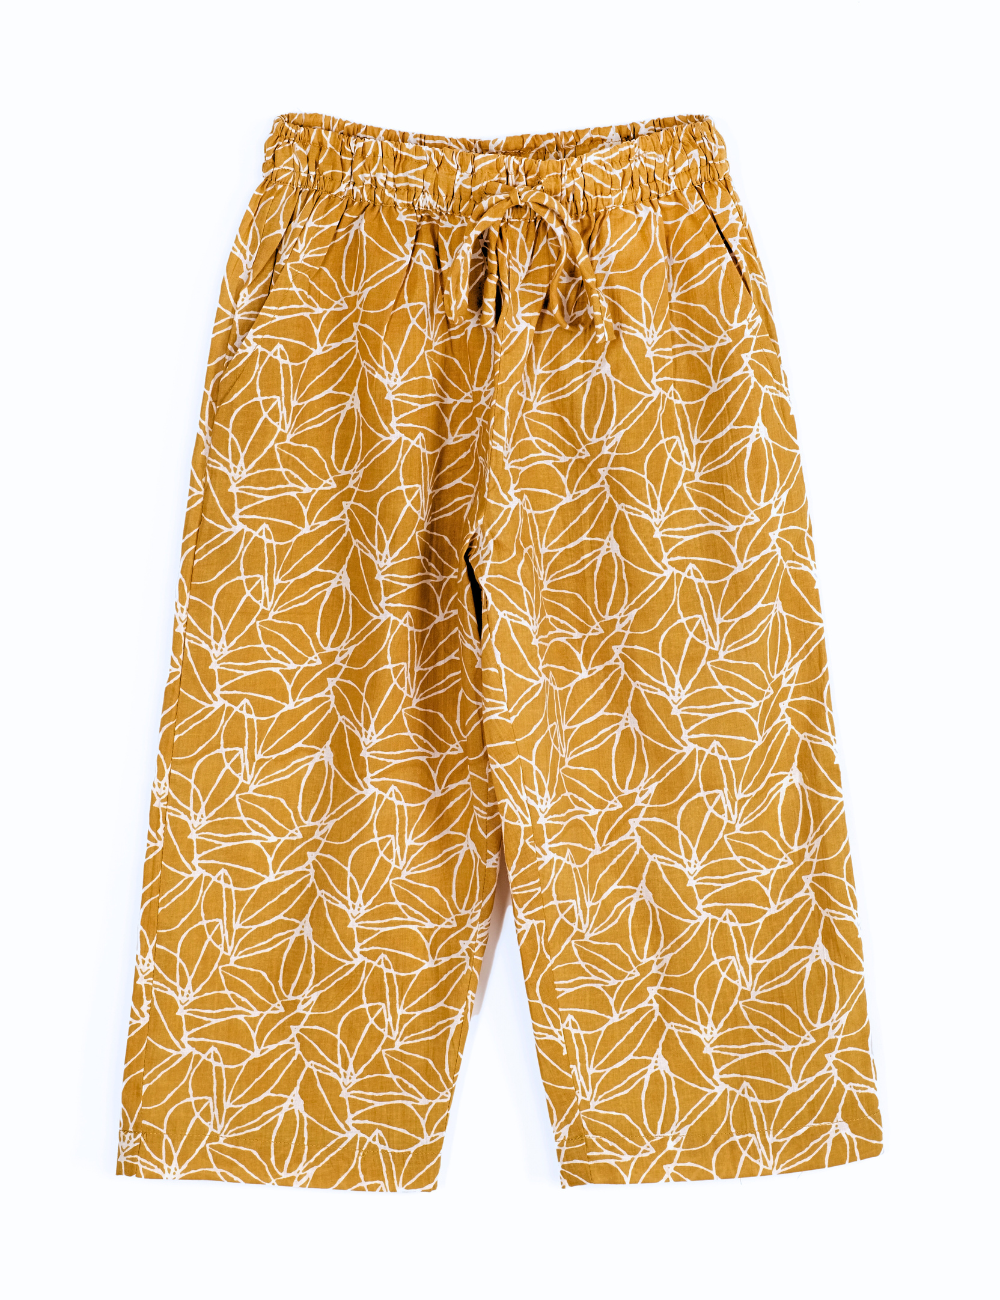 product photo of Indian retro block printed pants in mustard seed print